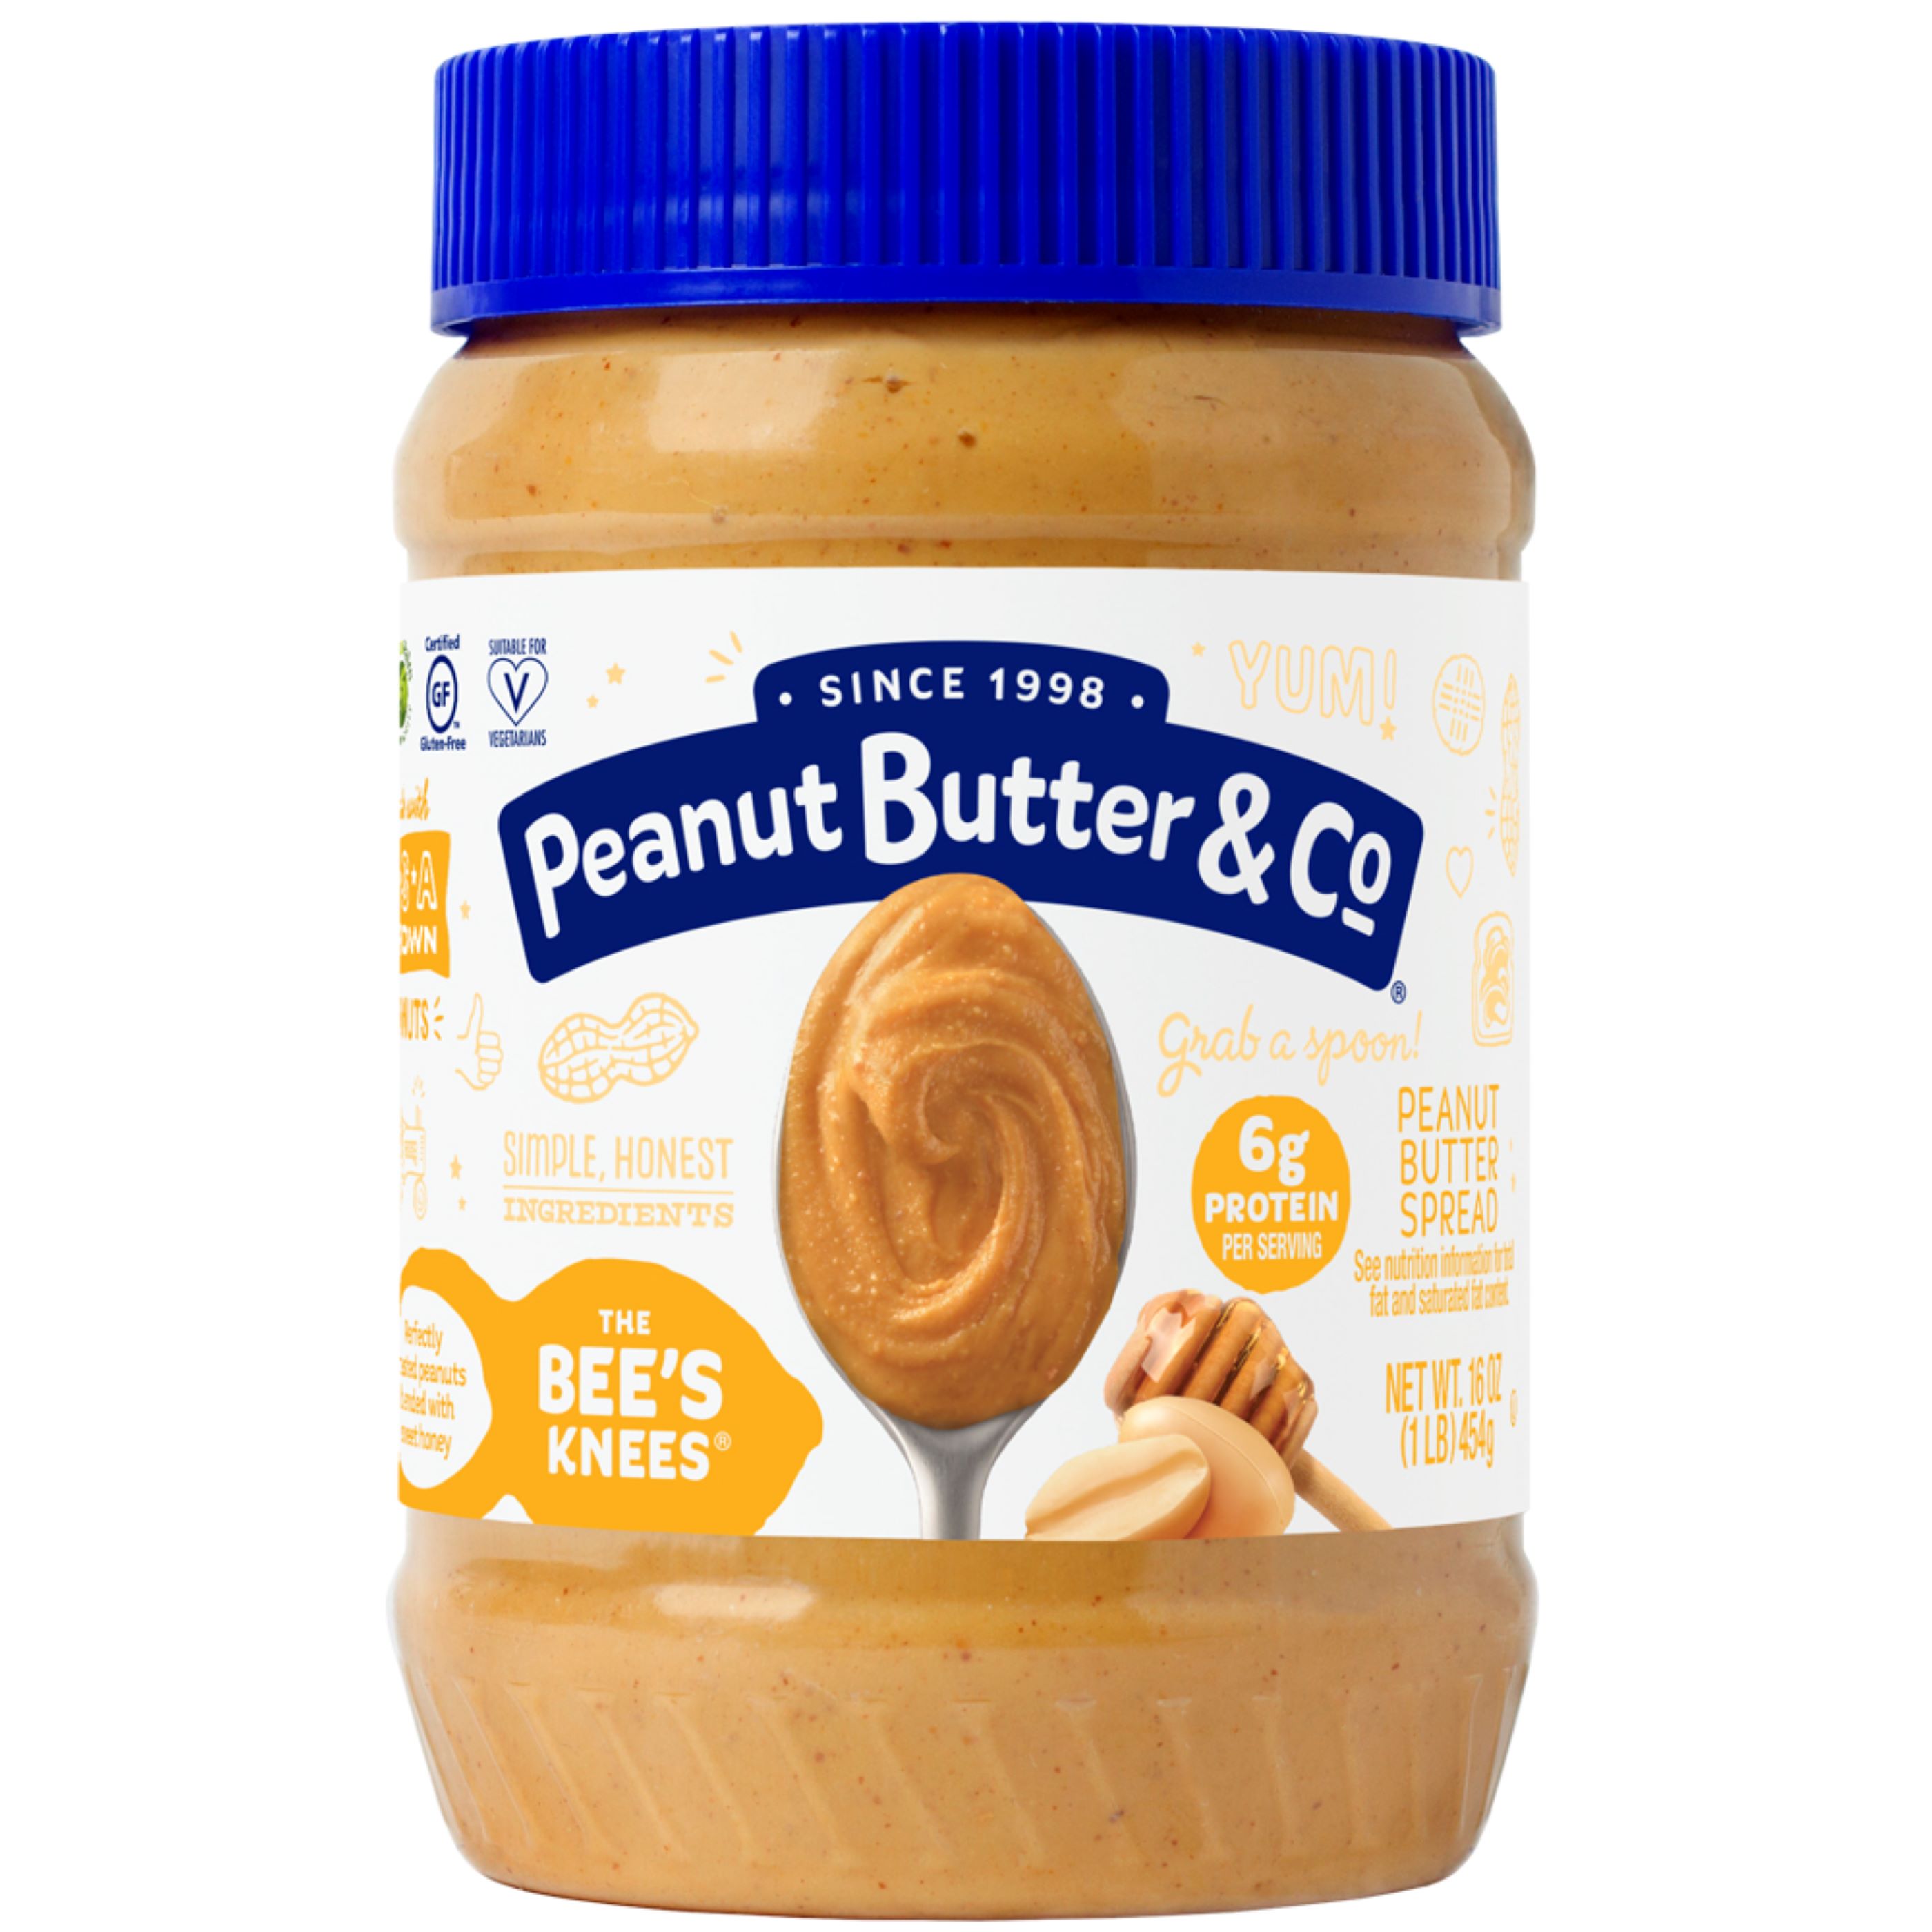 Peanut Butter & Co, The Bee's Knees, Peanut Butter Spread, 16 oz - image 1 of 6